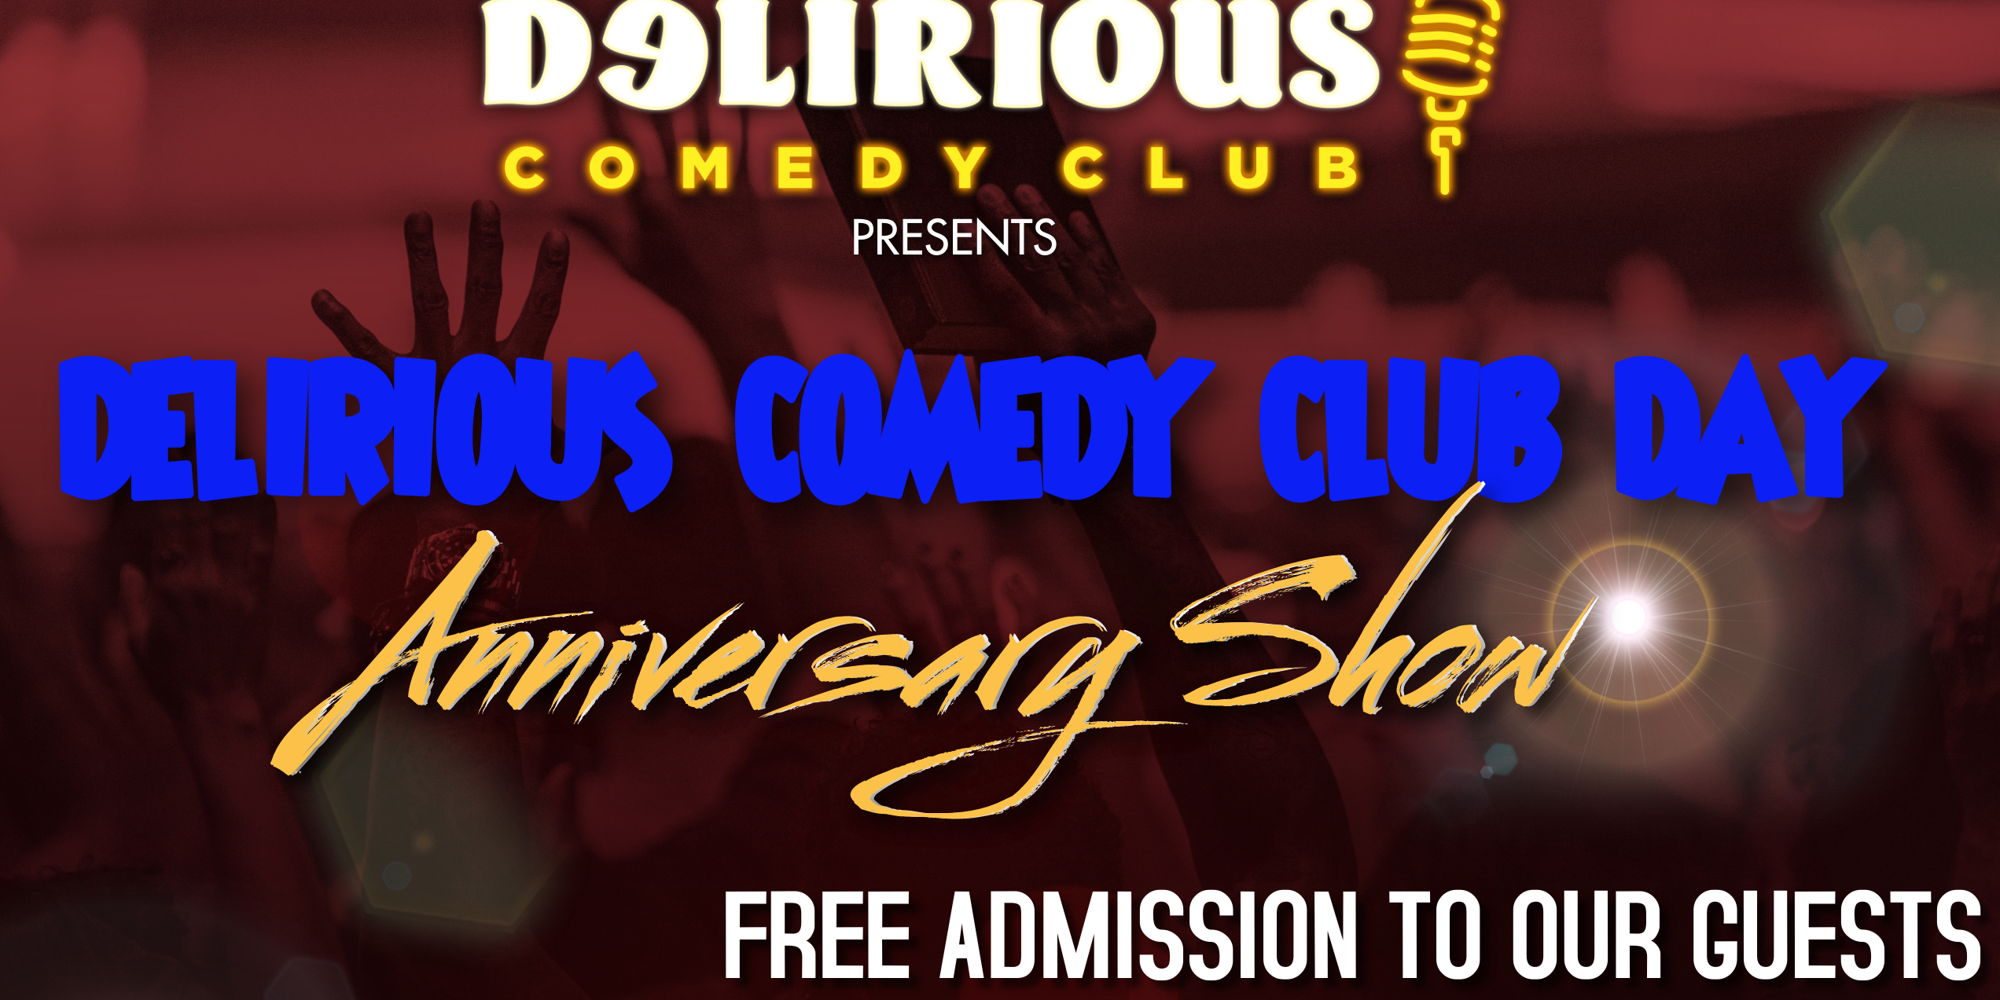 Delirious Comedy Club 500th Anniversary Show promotional image